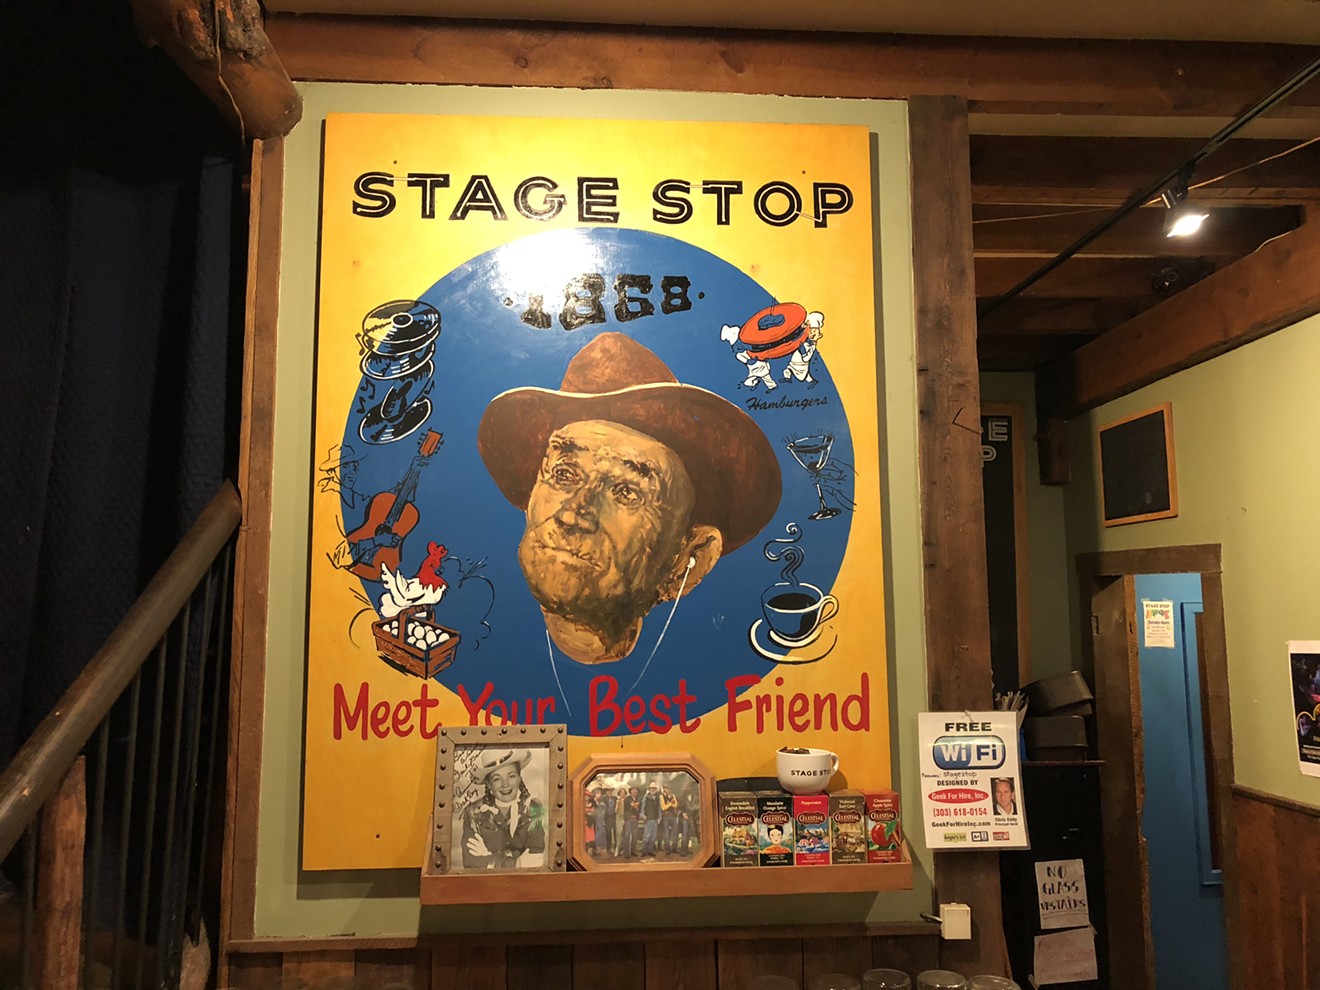 Meet your best friend at the Stage Stop.